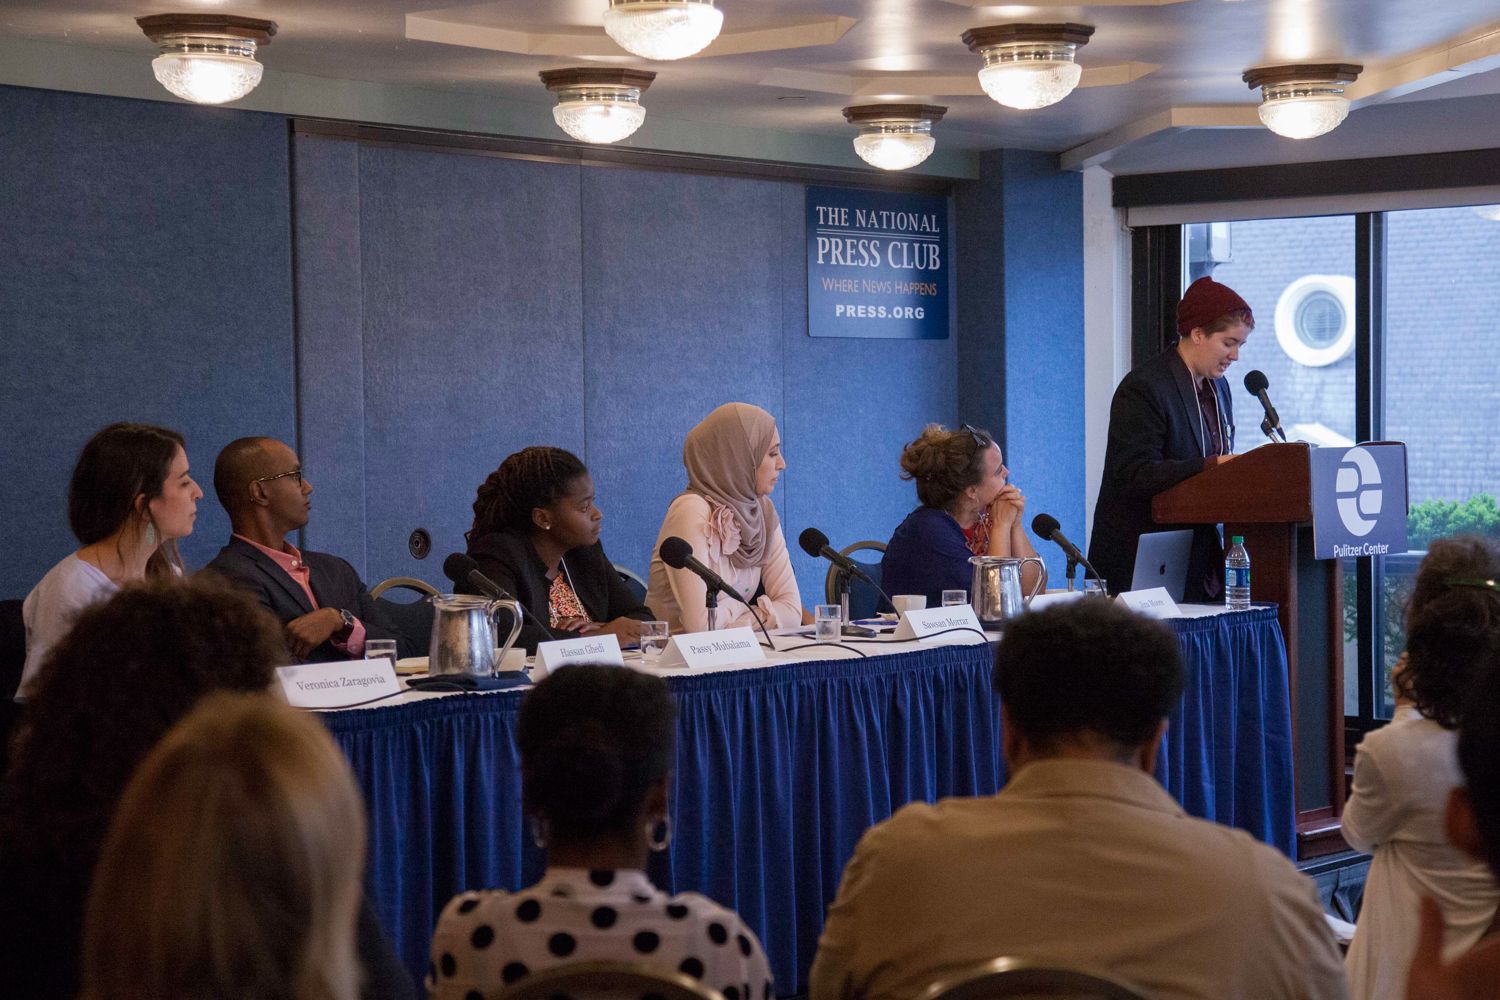 Pulitzer Center Fighting Words Poetry Contest 1st place winner Alex Holland, 11th grade student at Montgomery Blair High School, MD, reads "Sickness of the Sprawling City" before the "From the Ground Up: Building Peace Outside the Halls of Power" panel at the Beyond War conference. Image by Jin Ding. Washington, D.C., 2018.